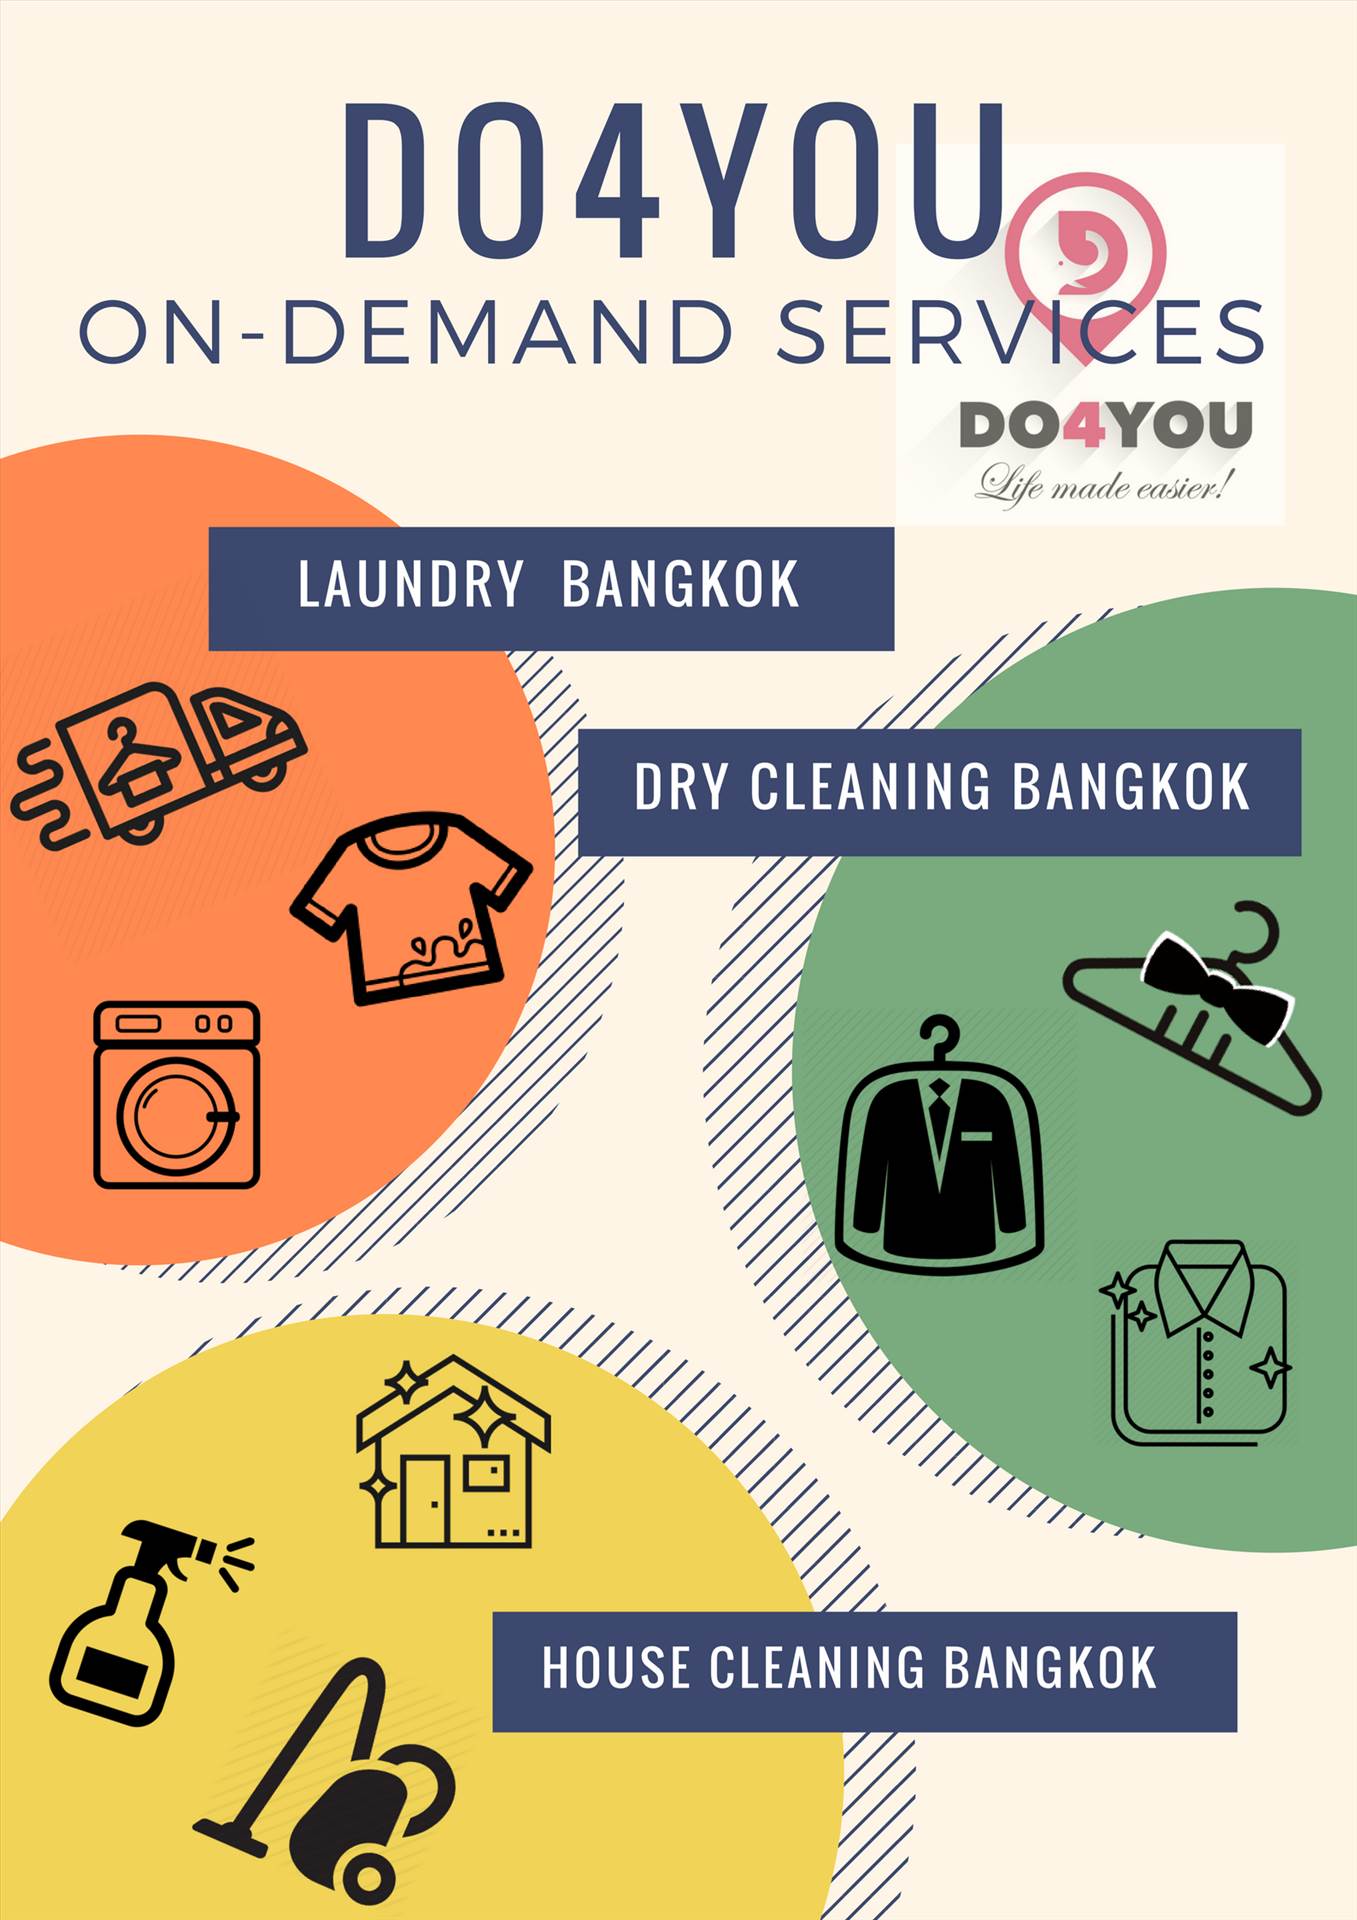 Laundry Services Bangkok.jpg  by DO4YOU